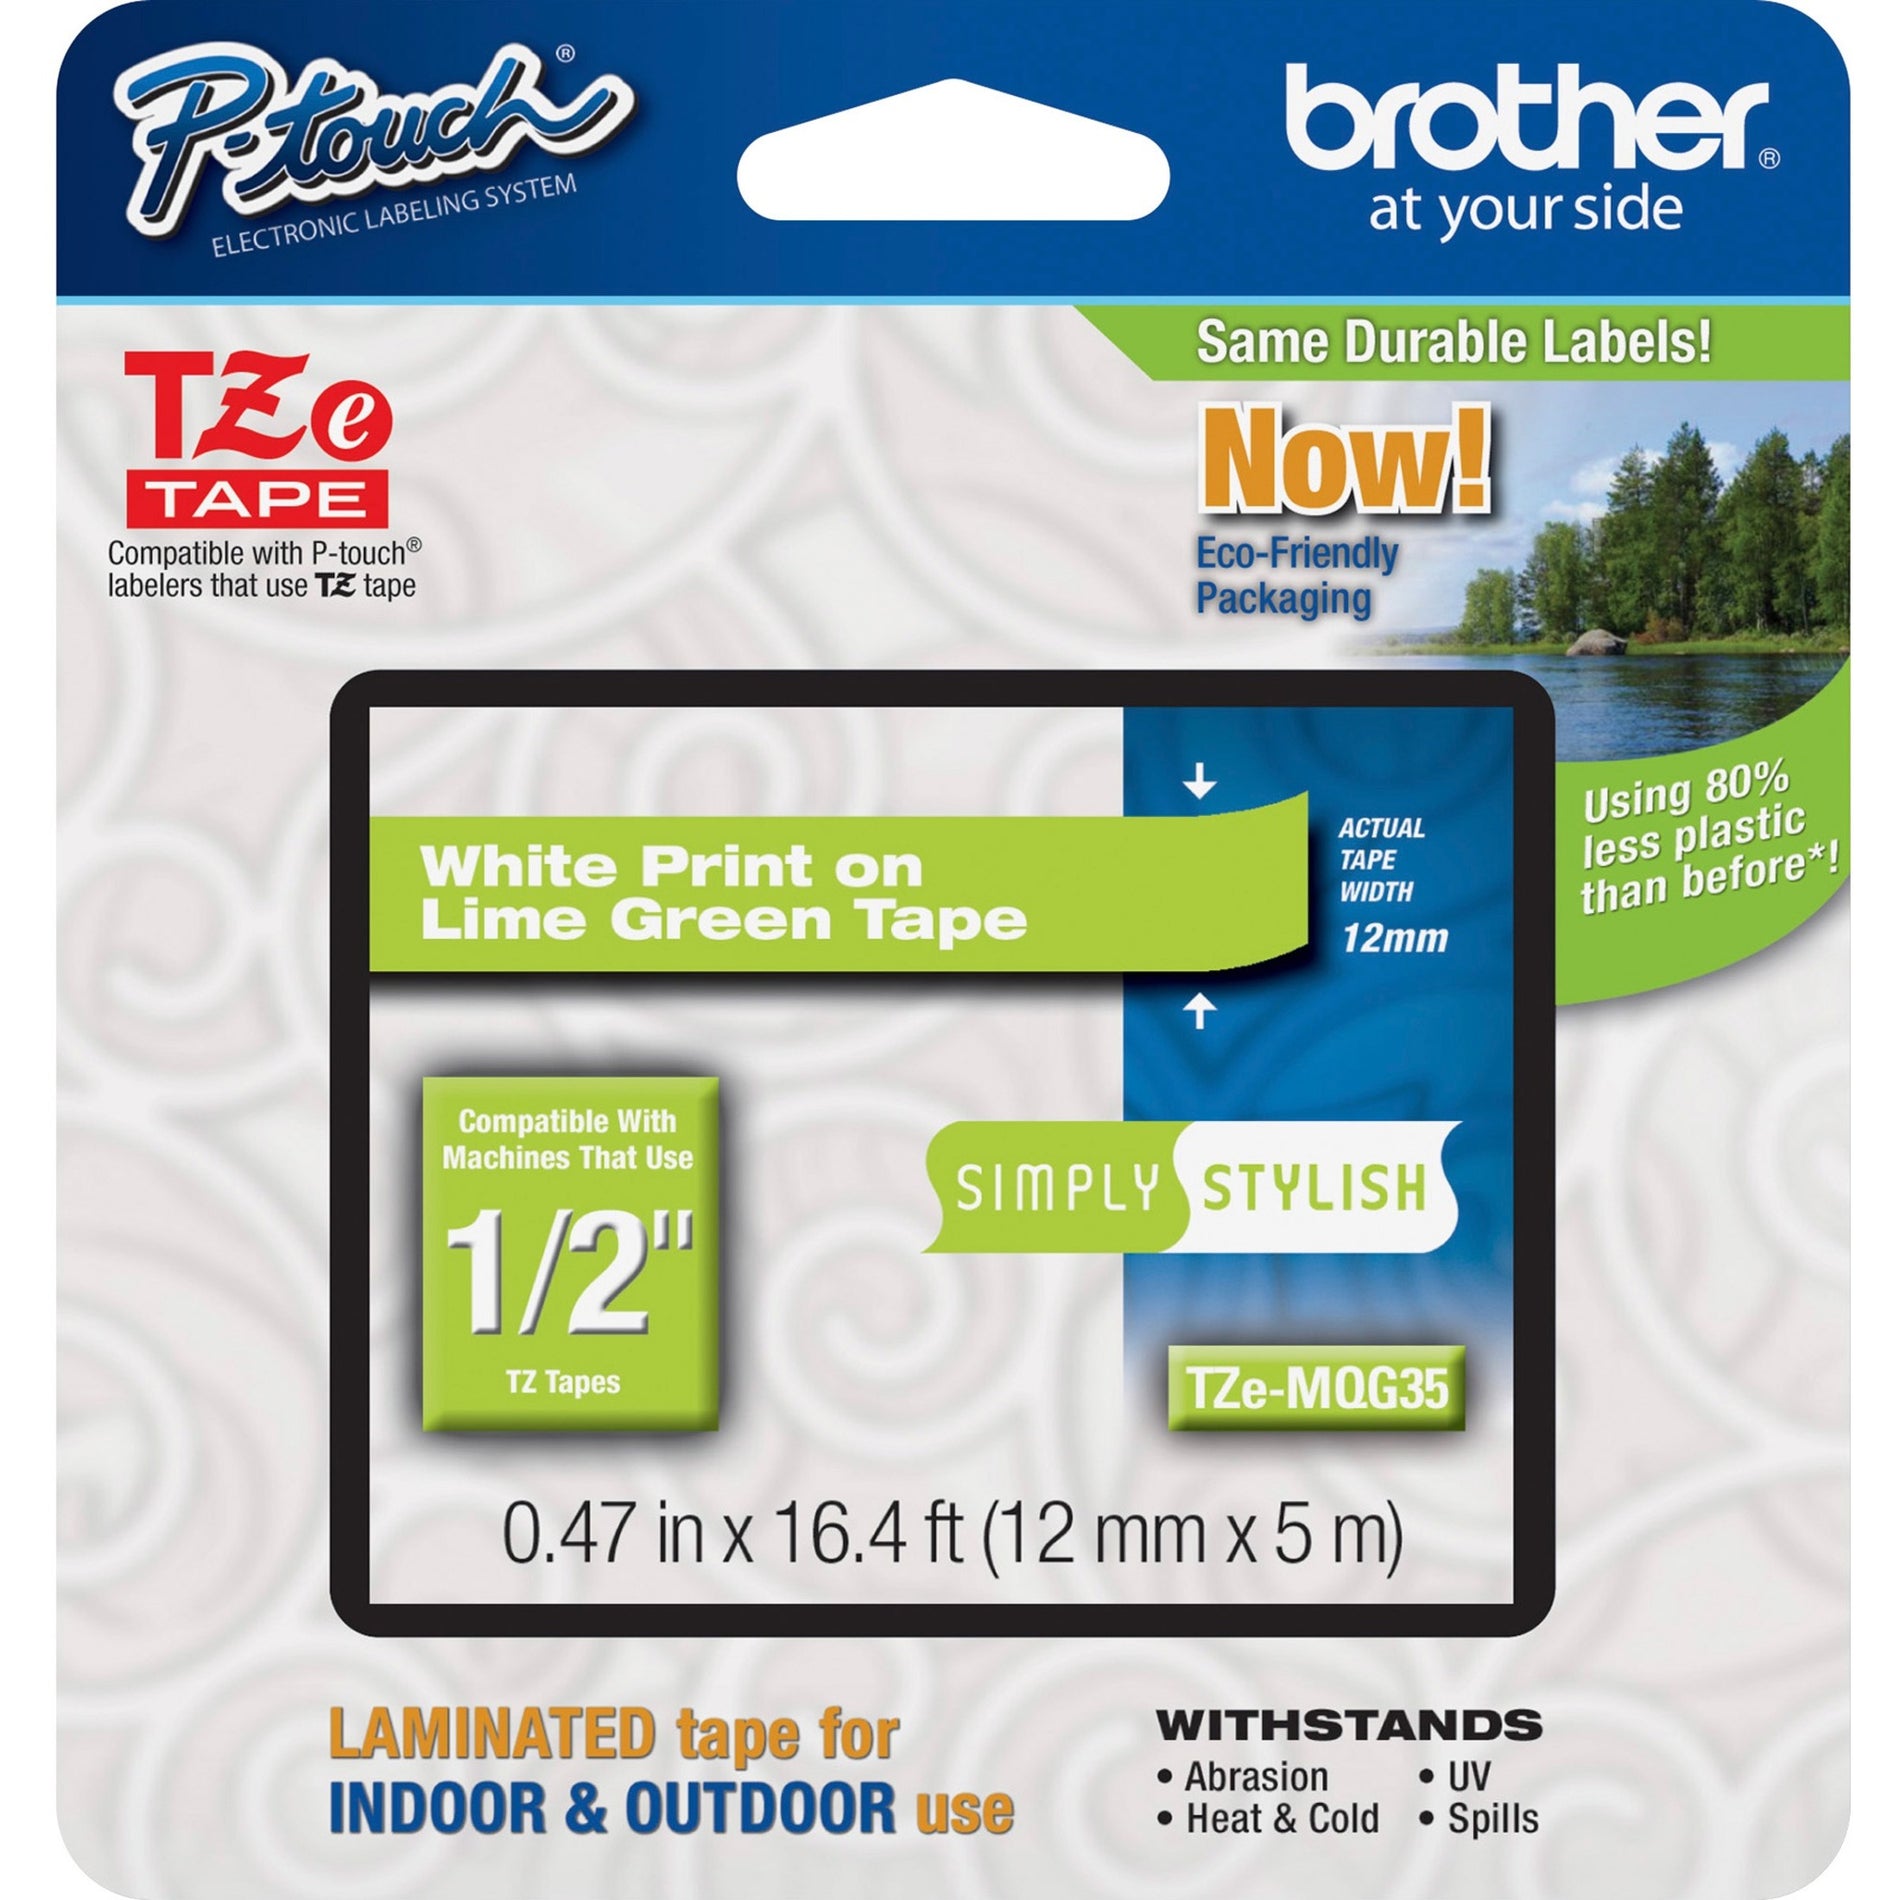 Brother TZEMQG35 P-Touch TZe Laminated Tape, White/Lime Green, 12mm